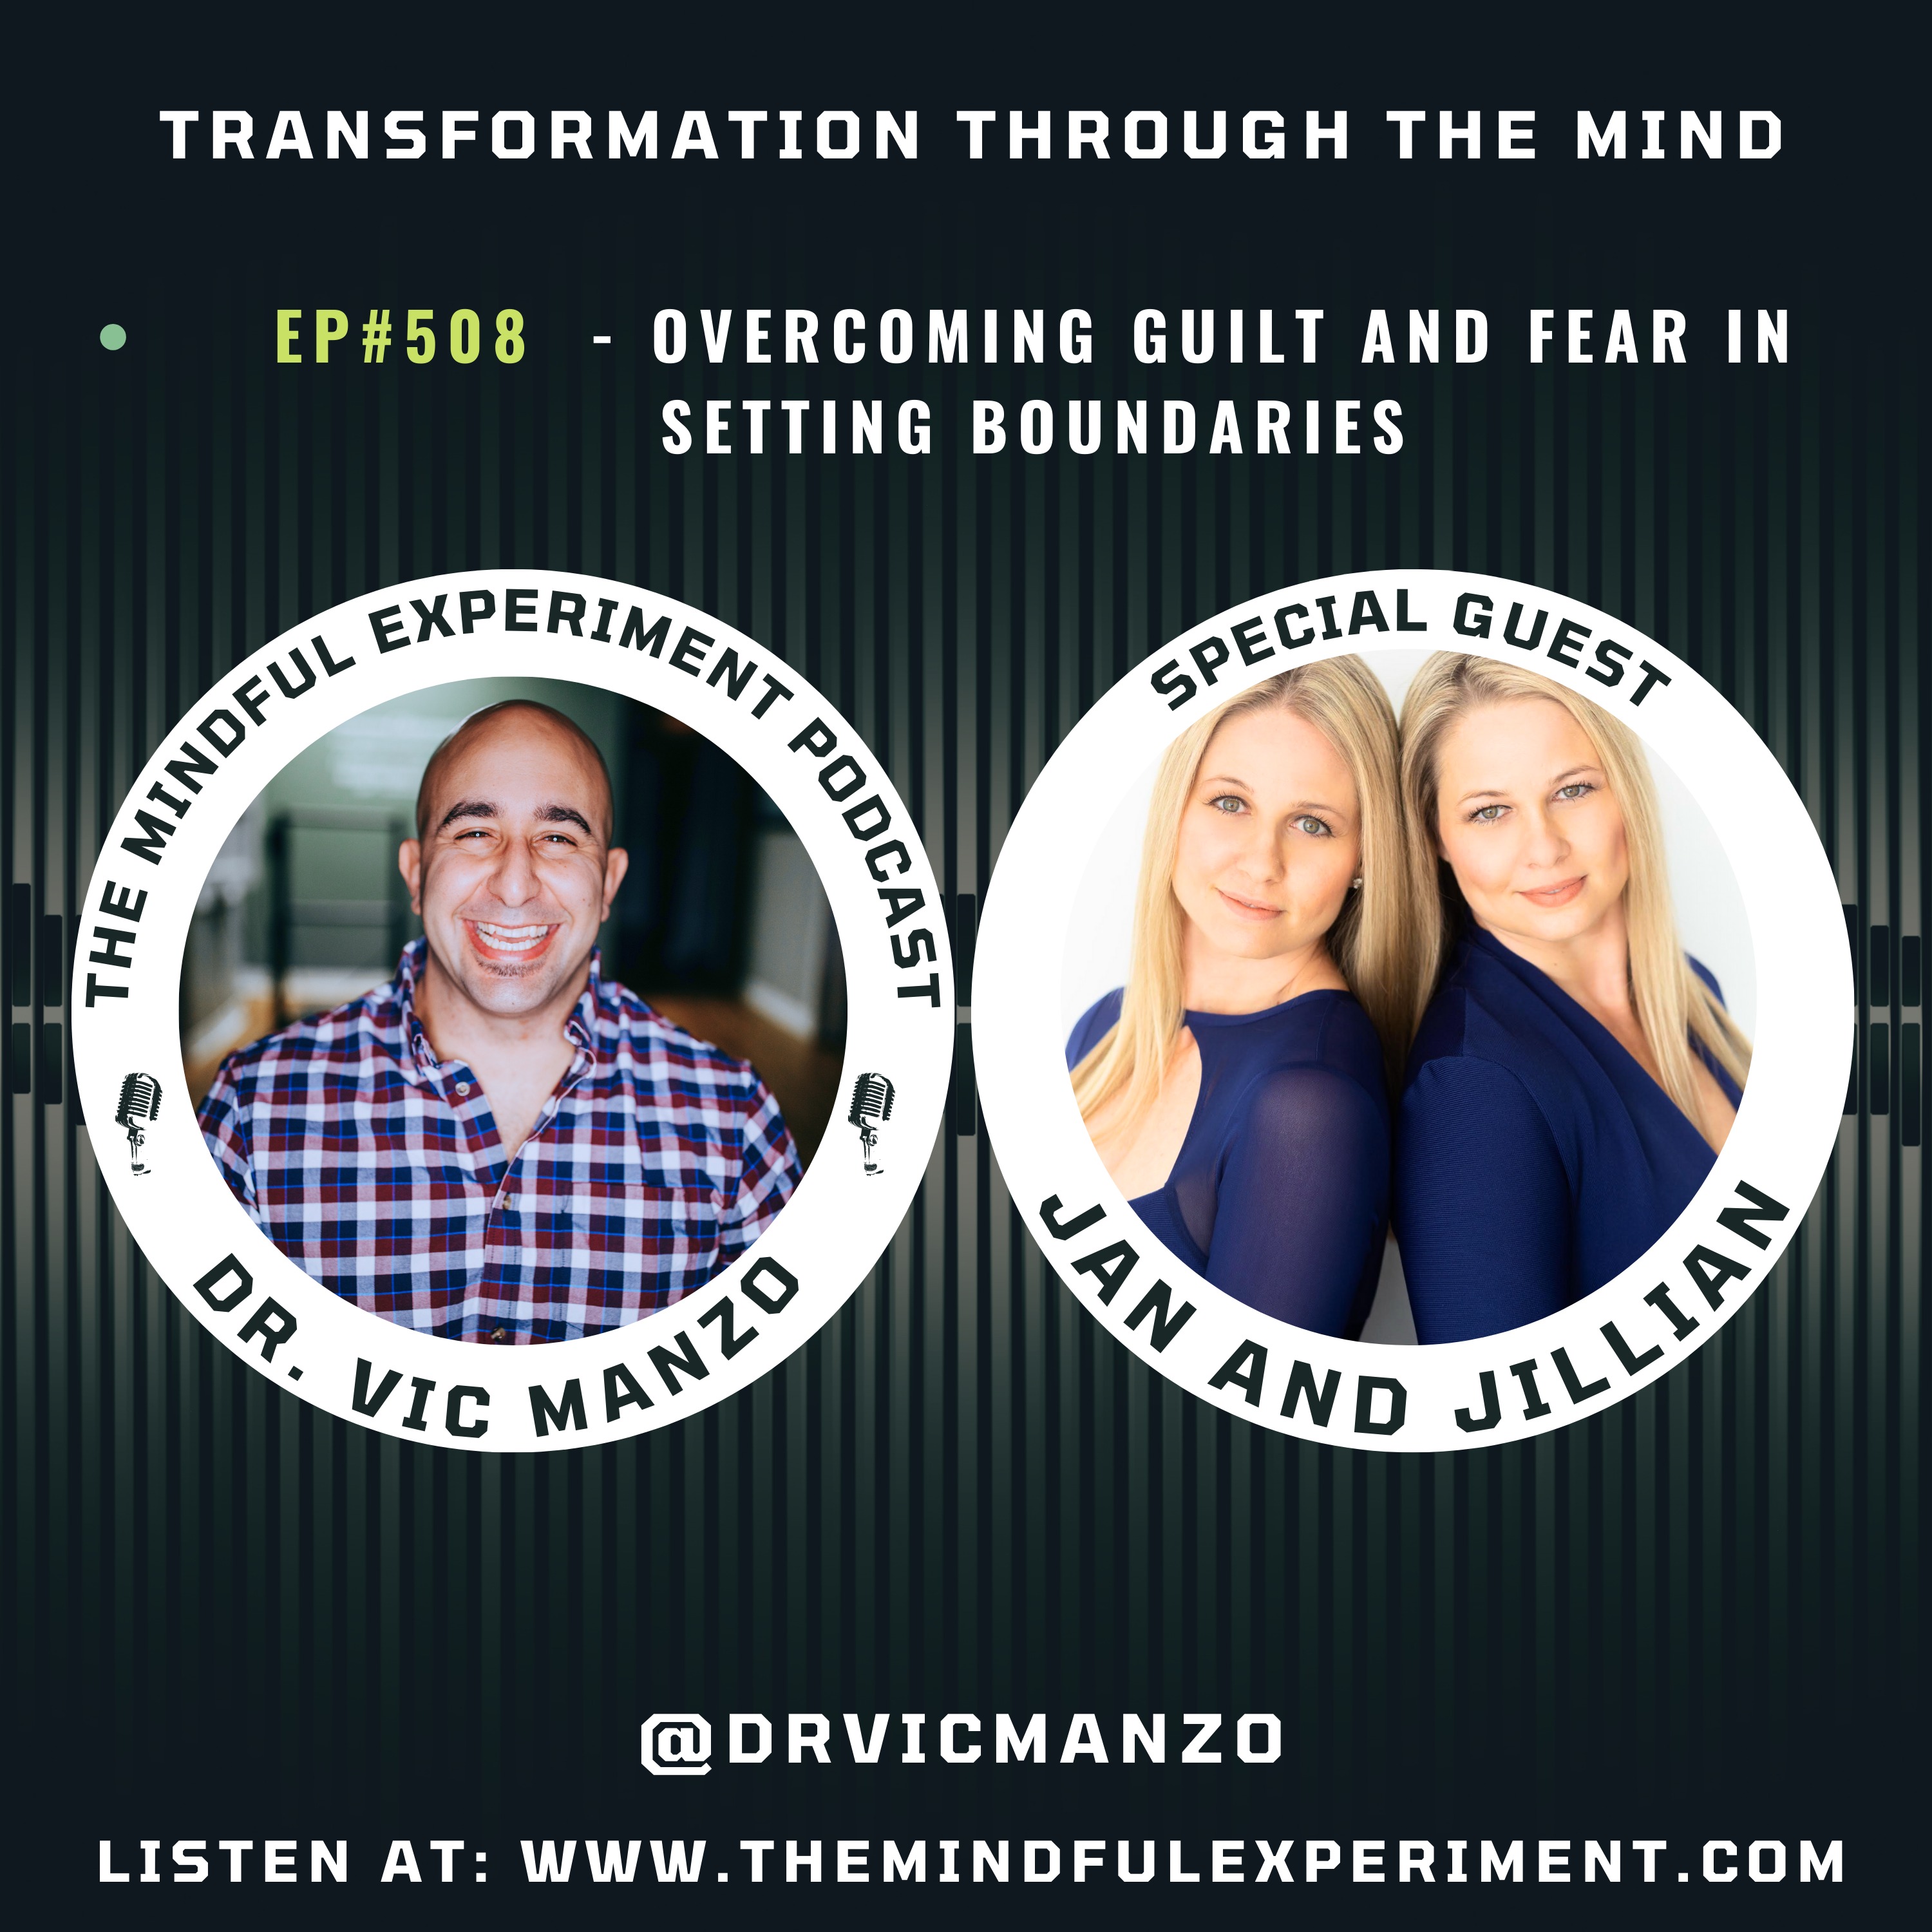 EP#508 - Overcoming Guilt and Fear in Setting Boundaries with Special Guests: Jan and Jillian